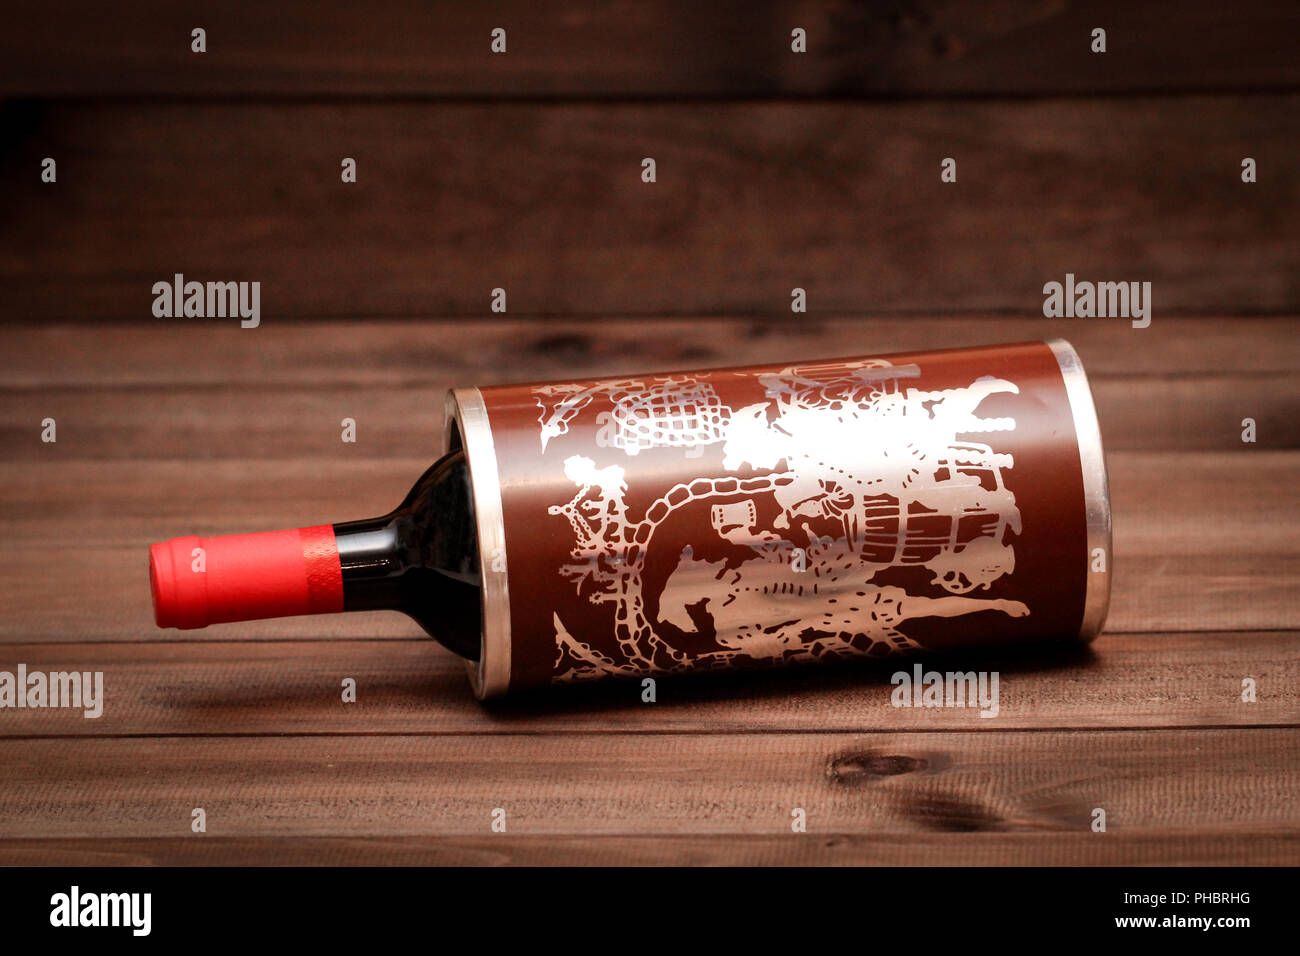 Winebottle in a Festive wine cooler Stock Photo